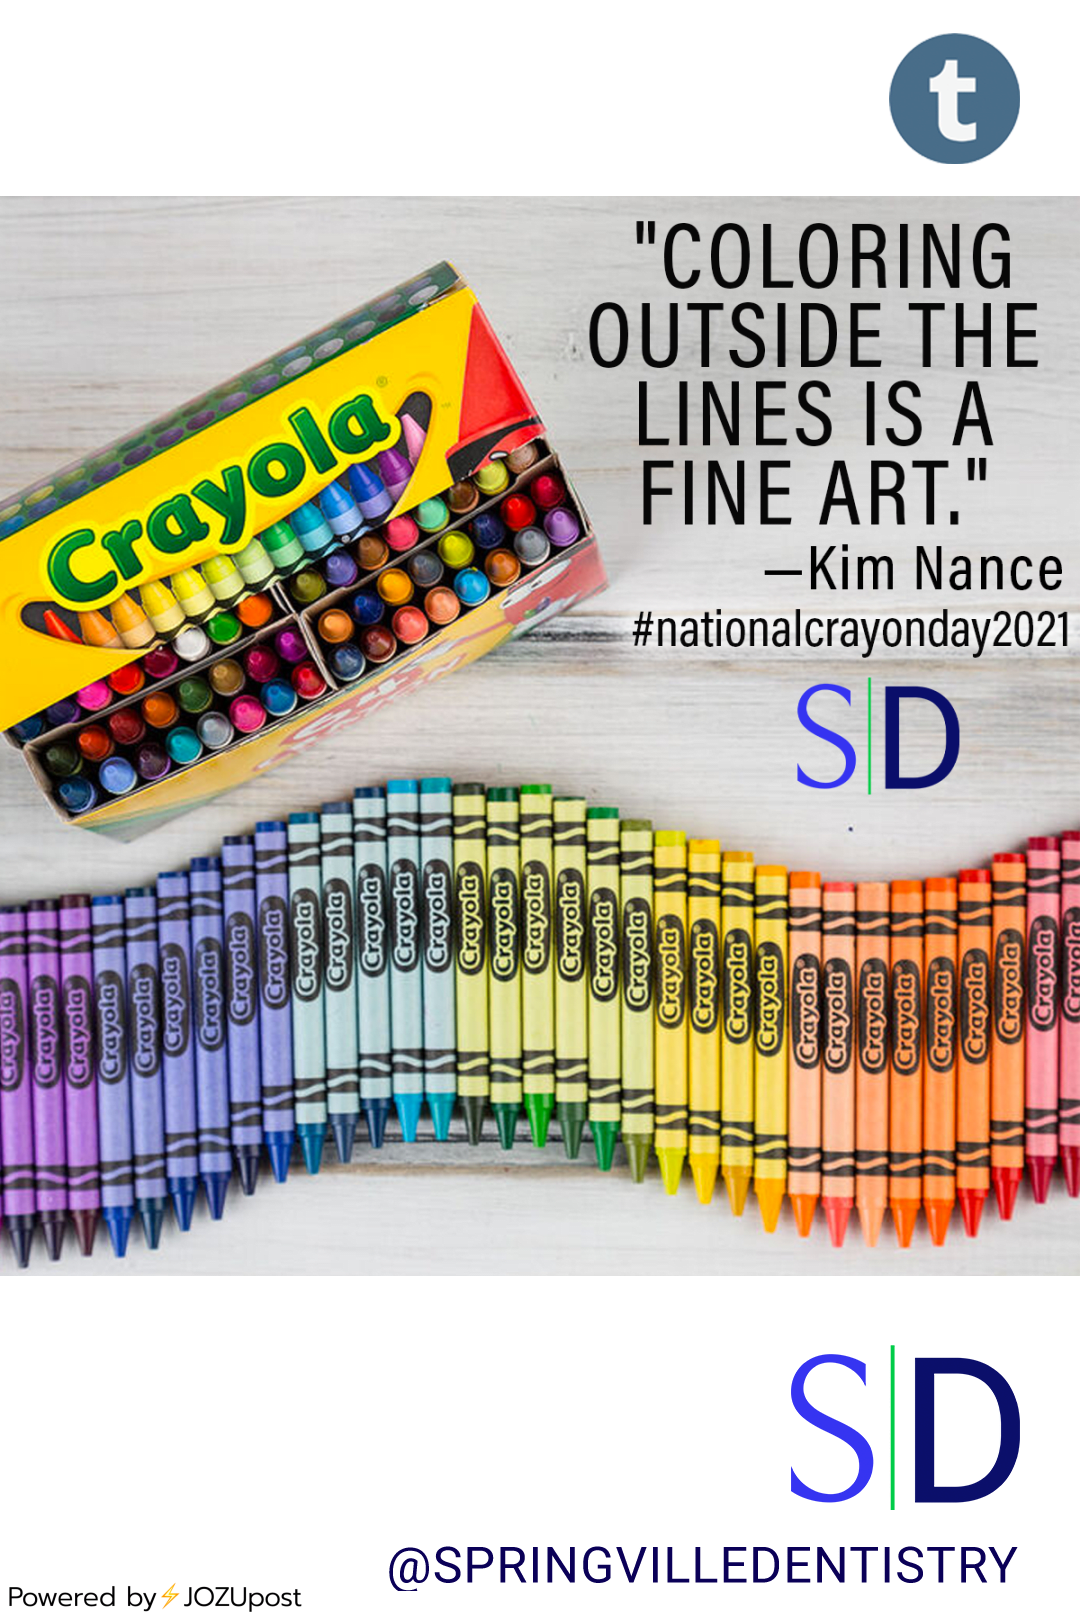 “Coloring outside the lines is a fine art.” —Kim Nance
•
•
•
•
•
•
•
#nationalcrayonday #bestdentalofficeinutahvalley